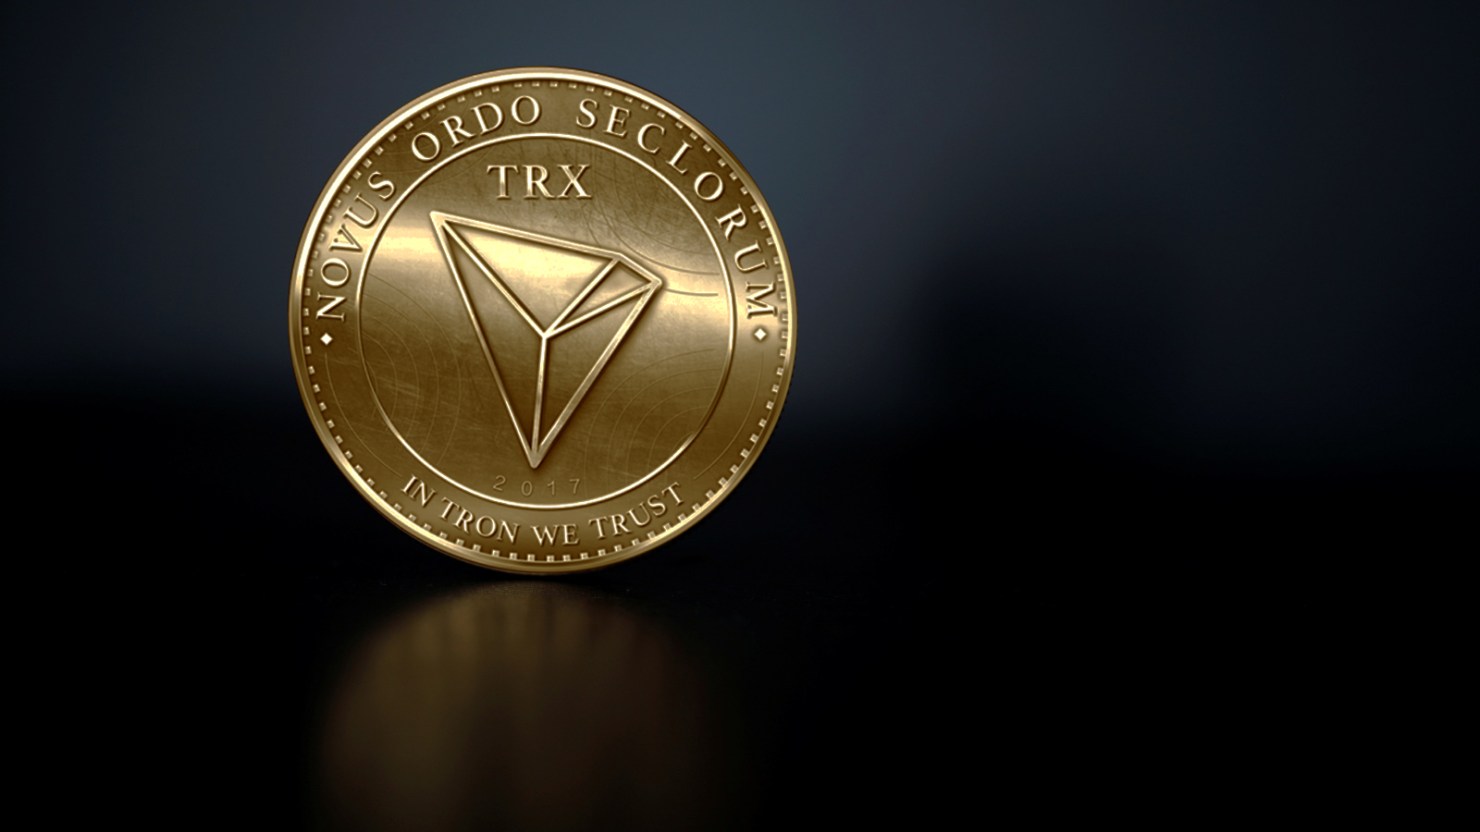  tron trx could overcoming confidence versus lead 